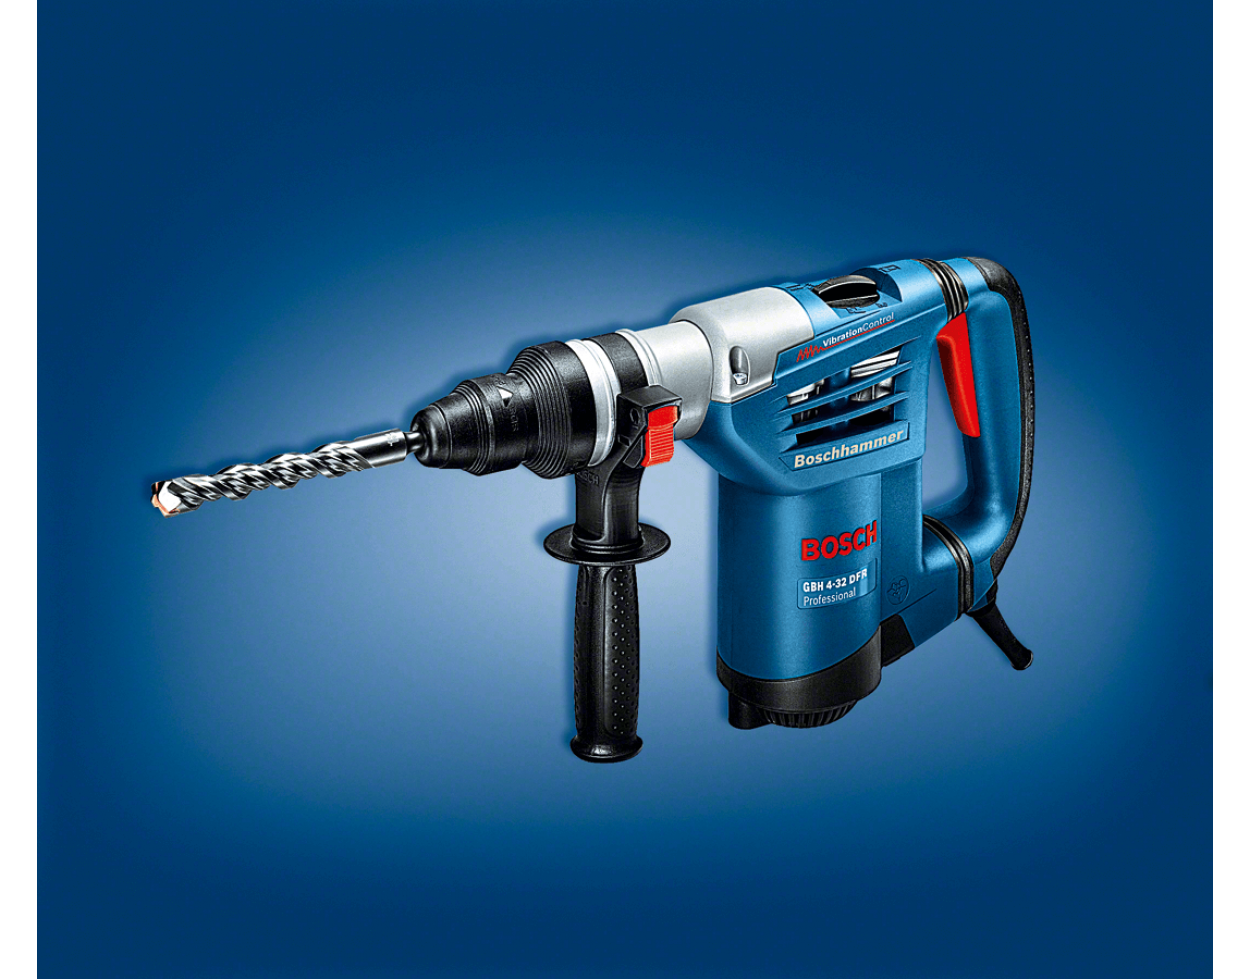 | SDS with Professional Rotary GBH 4-32 Hammer plus Bosch DFR